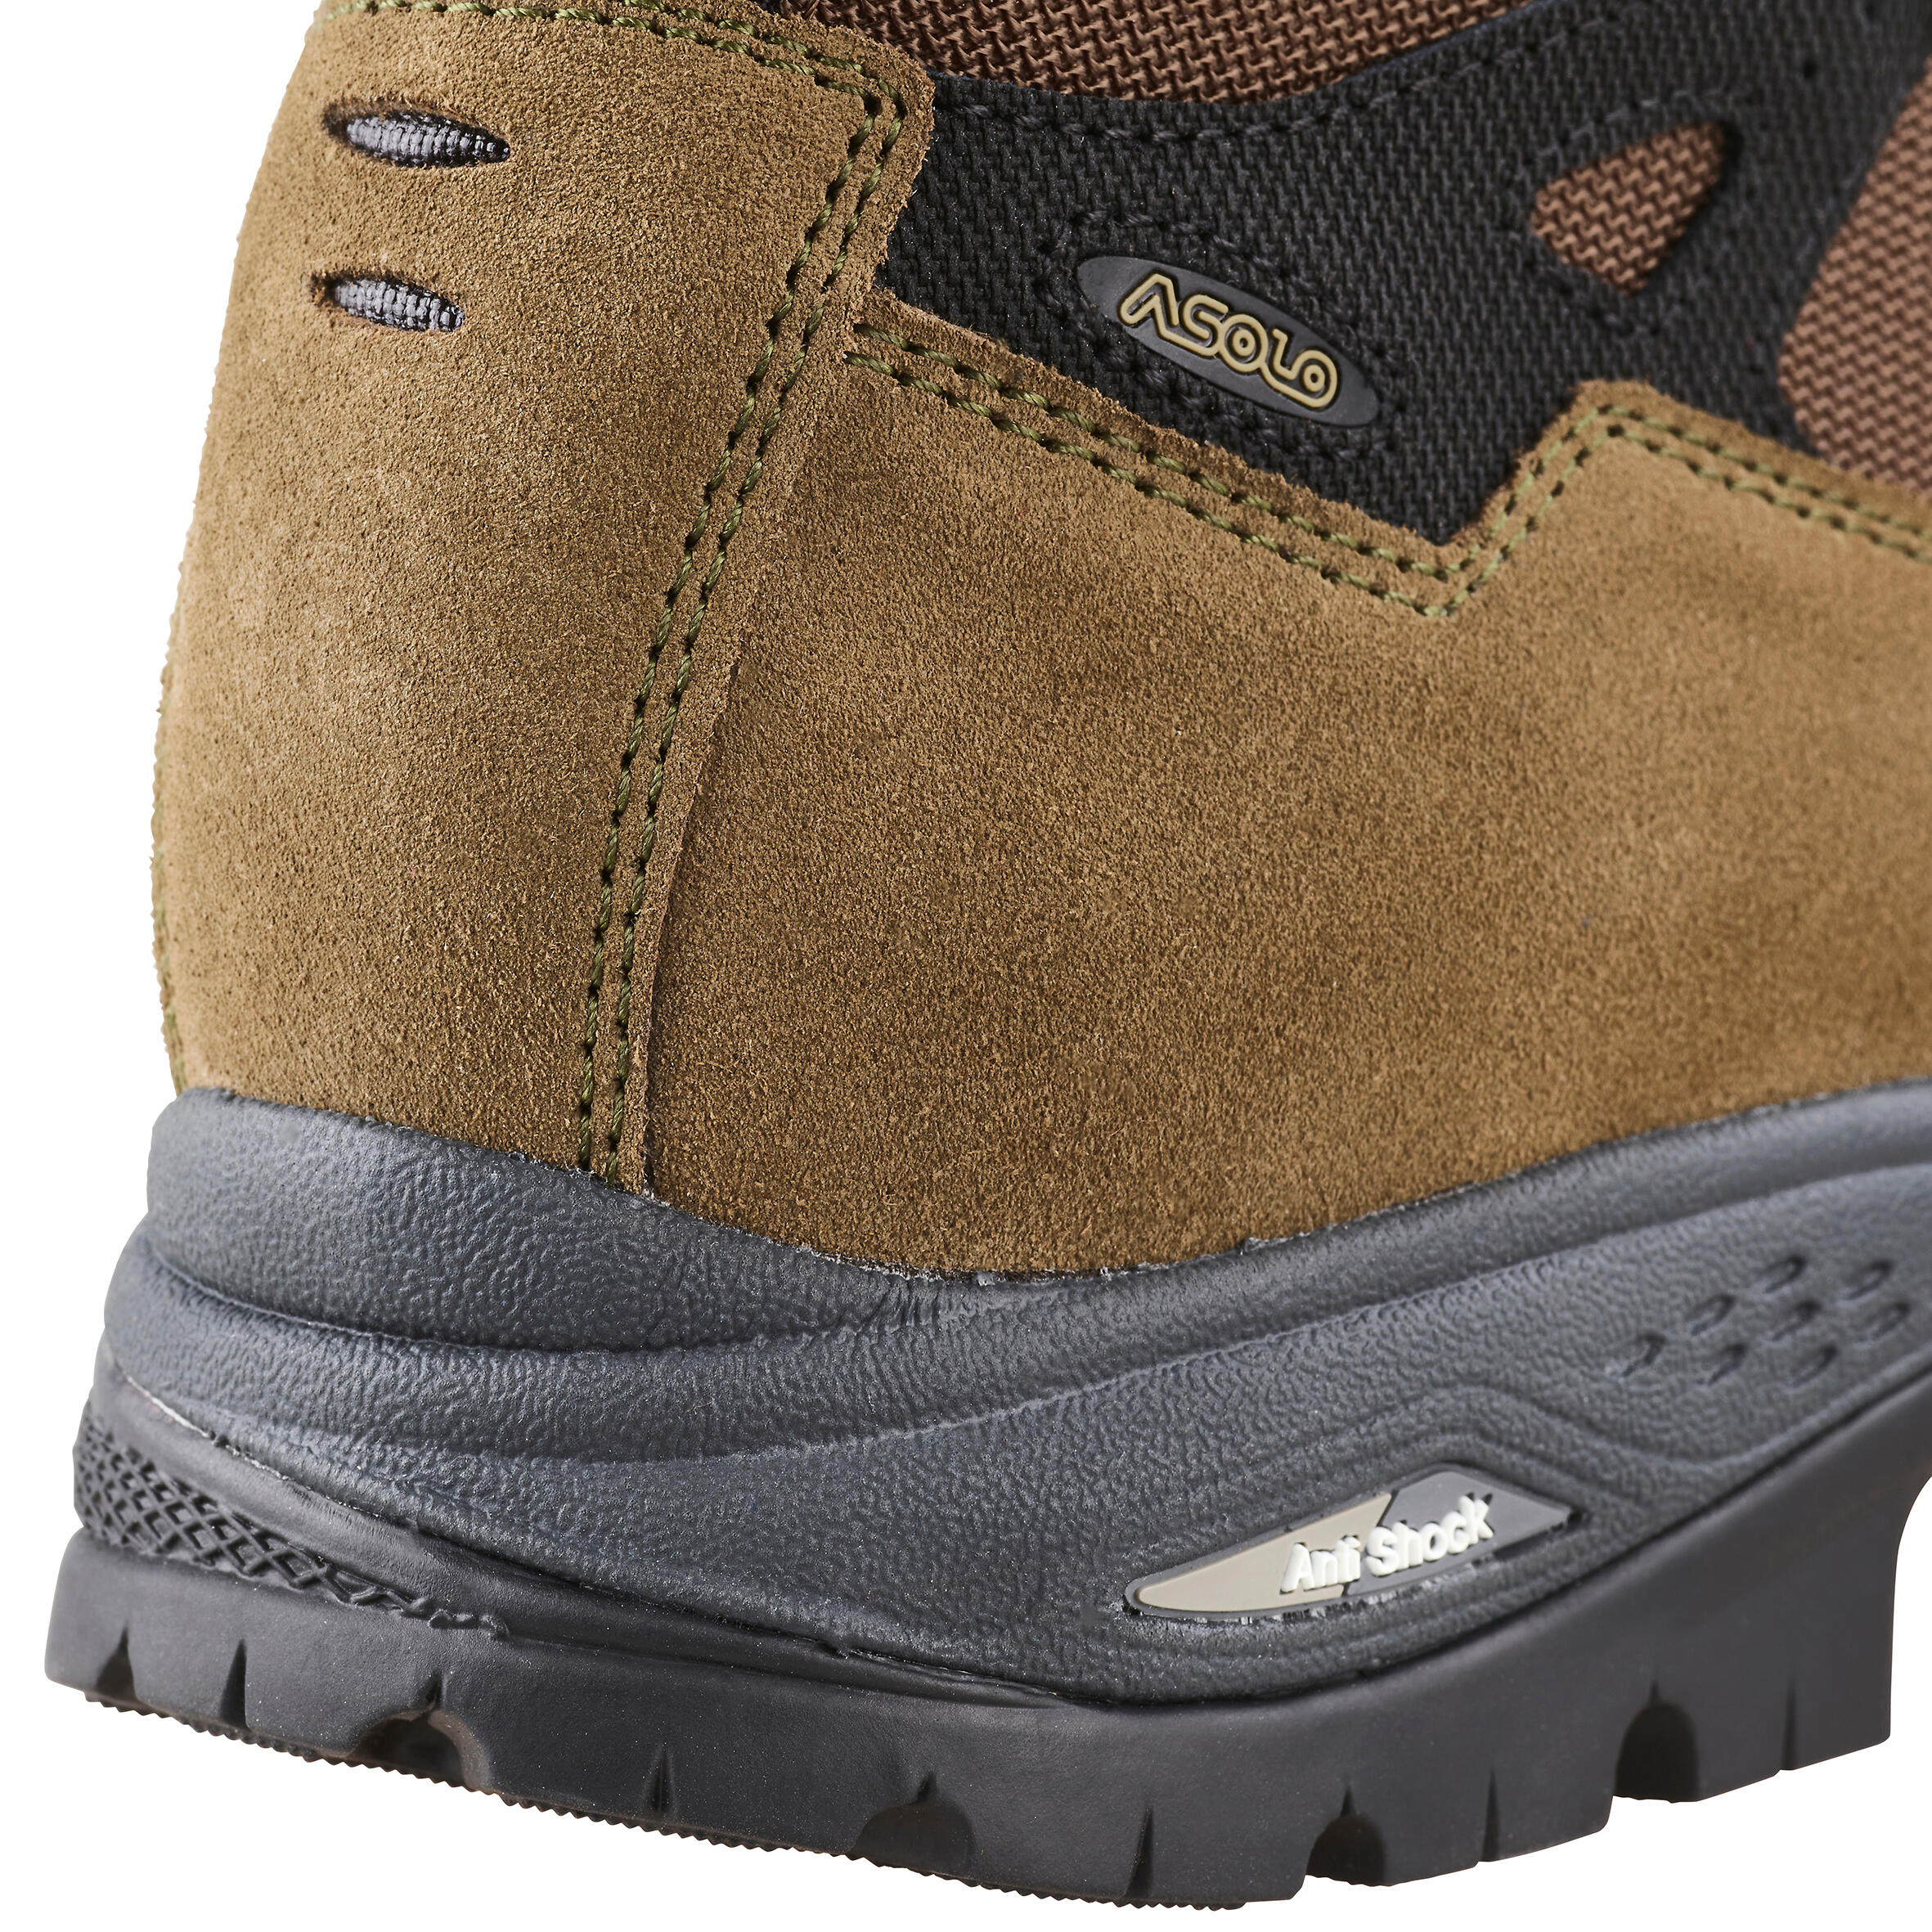 Waterproof Country Sport Boots Asolo X-Hunt Land Gore-Tex Vibram 11/12